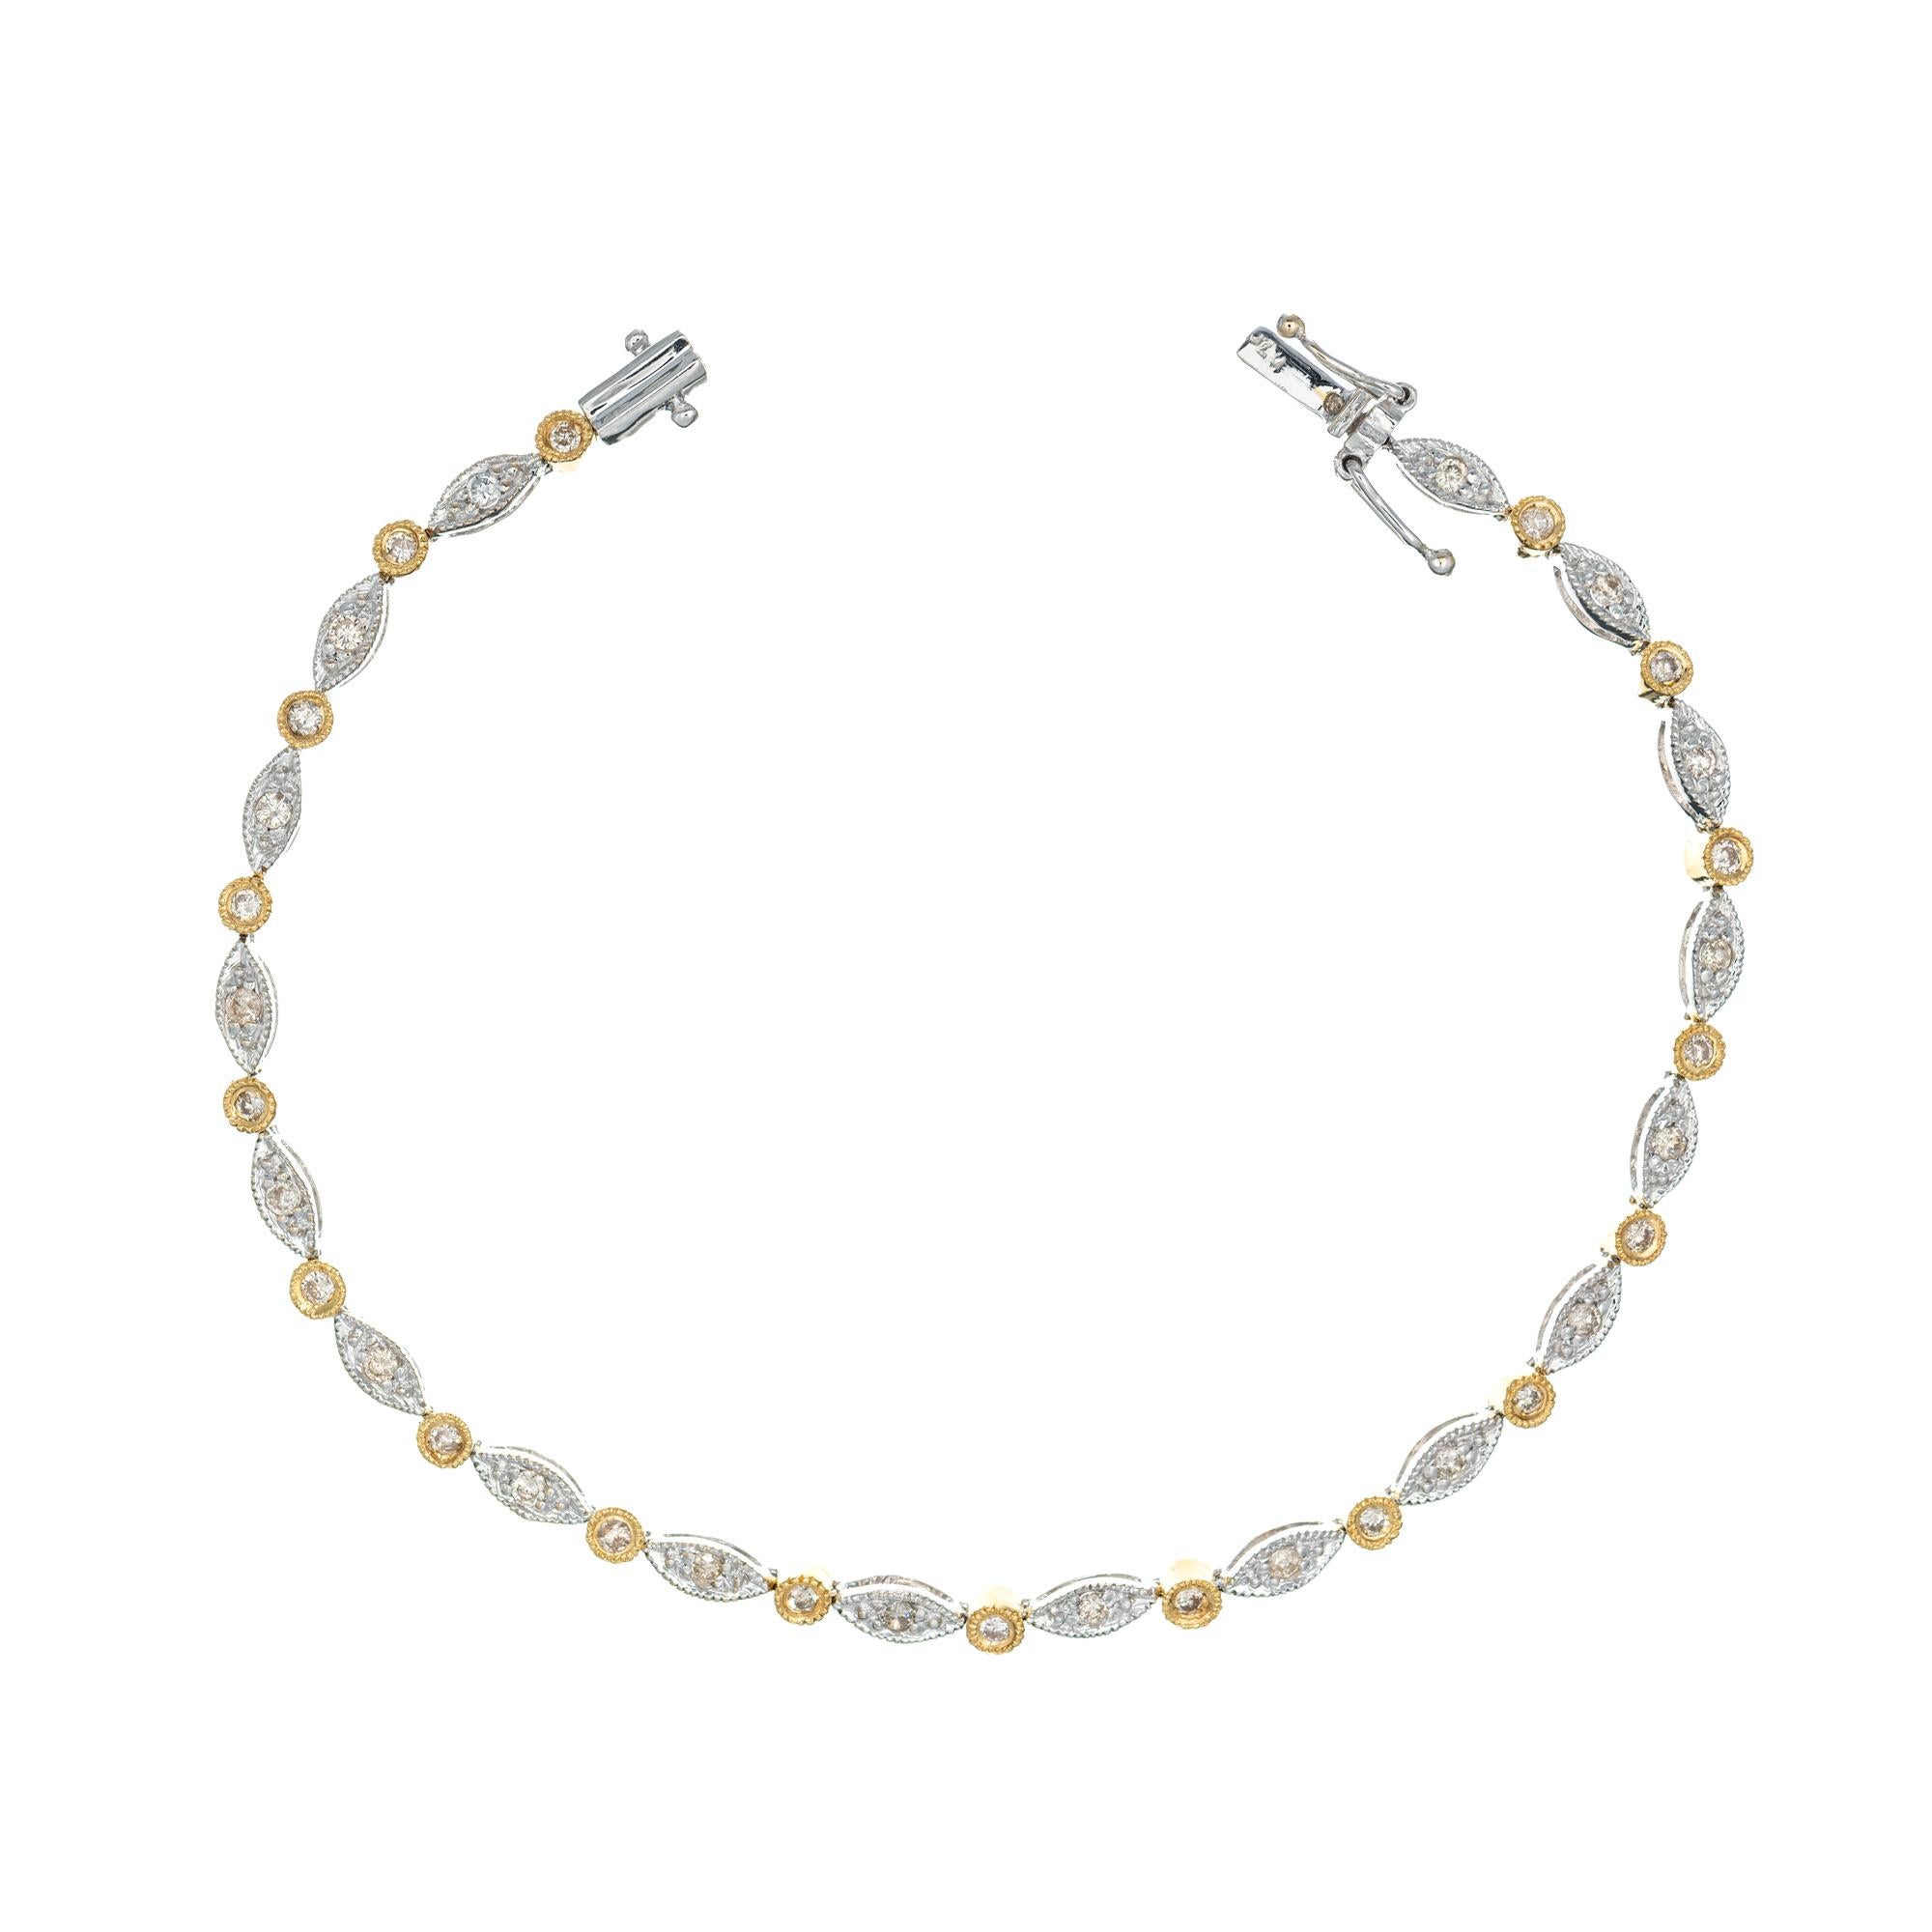 Necklace and or bracelet diamond set. 120 brilliant cut diamonds in 18k white gold marquise and yellow gold tubes sections. This versatile piece can be worn as a 17 inch necklace and 7 inch matching bracelet or attached together to make a 24 inch